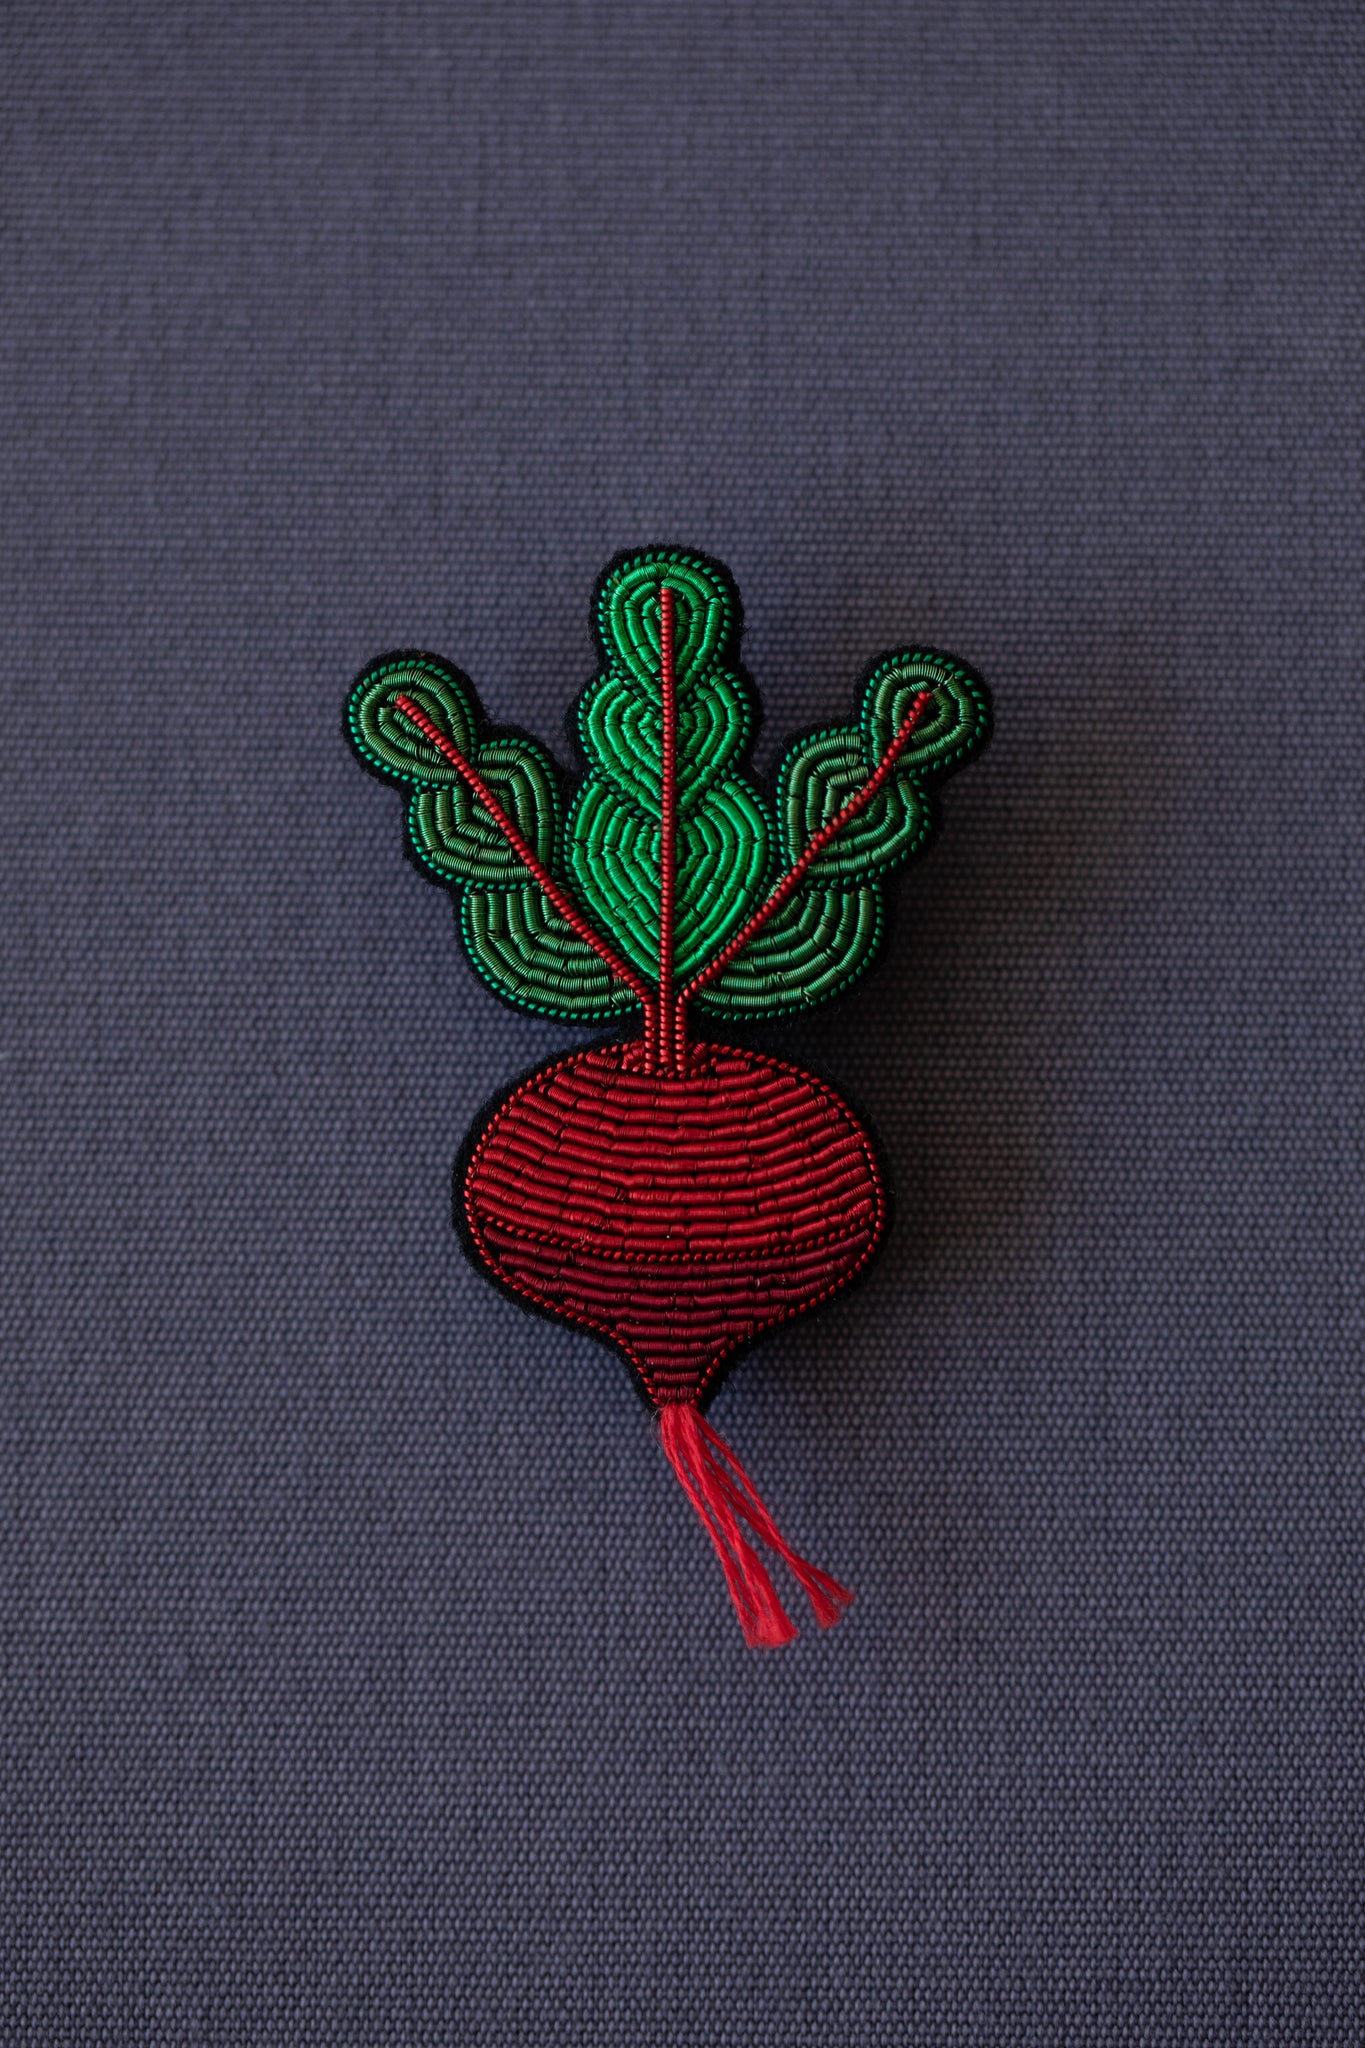 Embroidered Pins- Foods